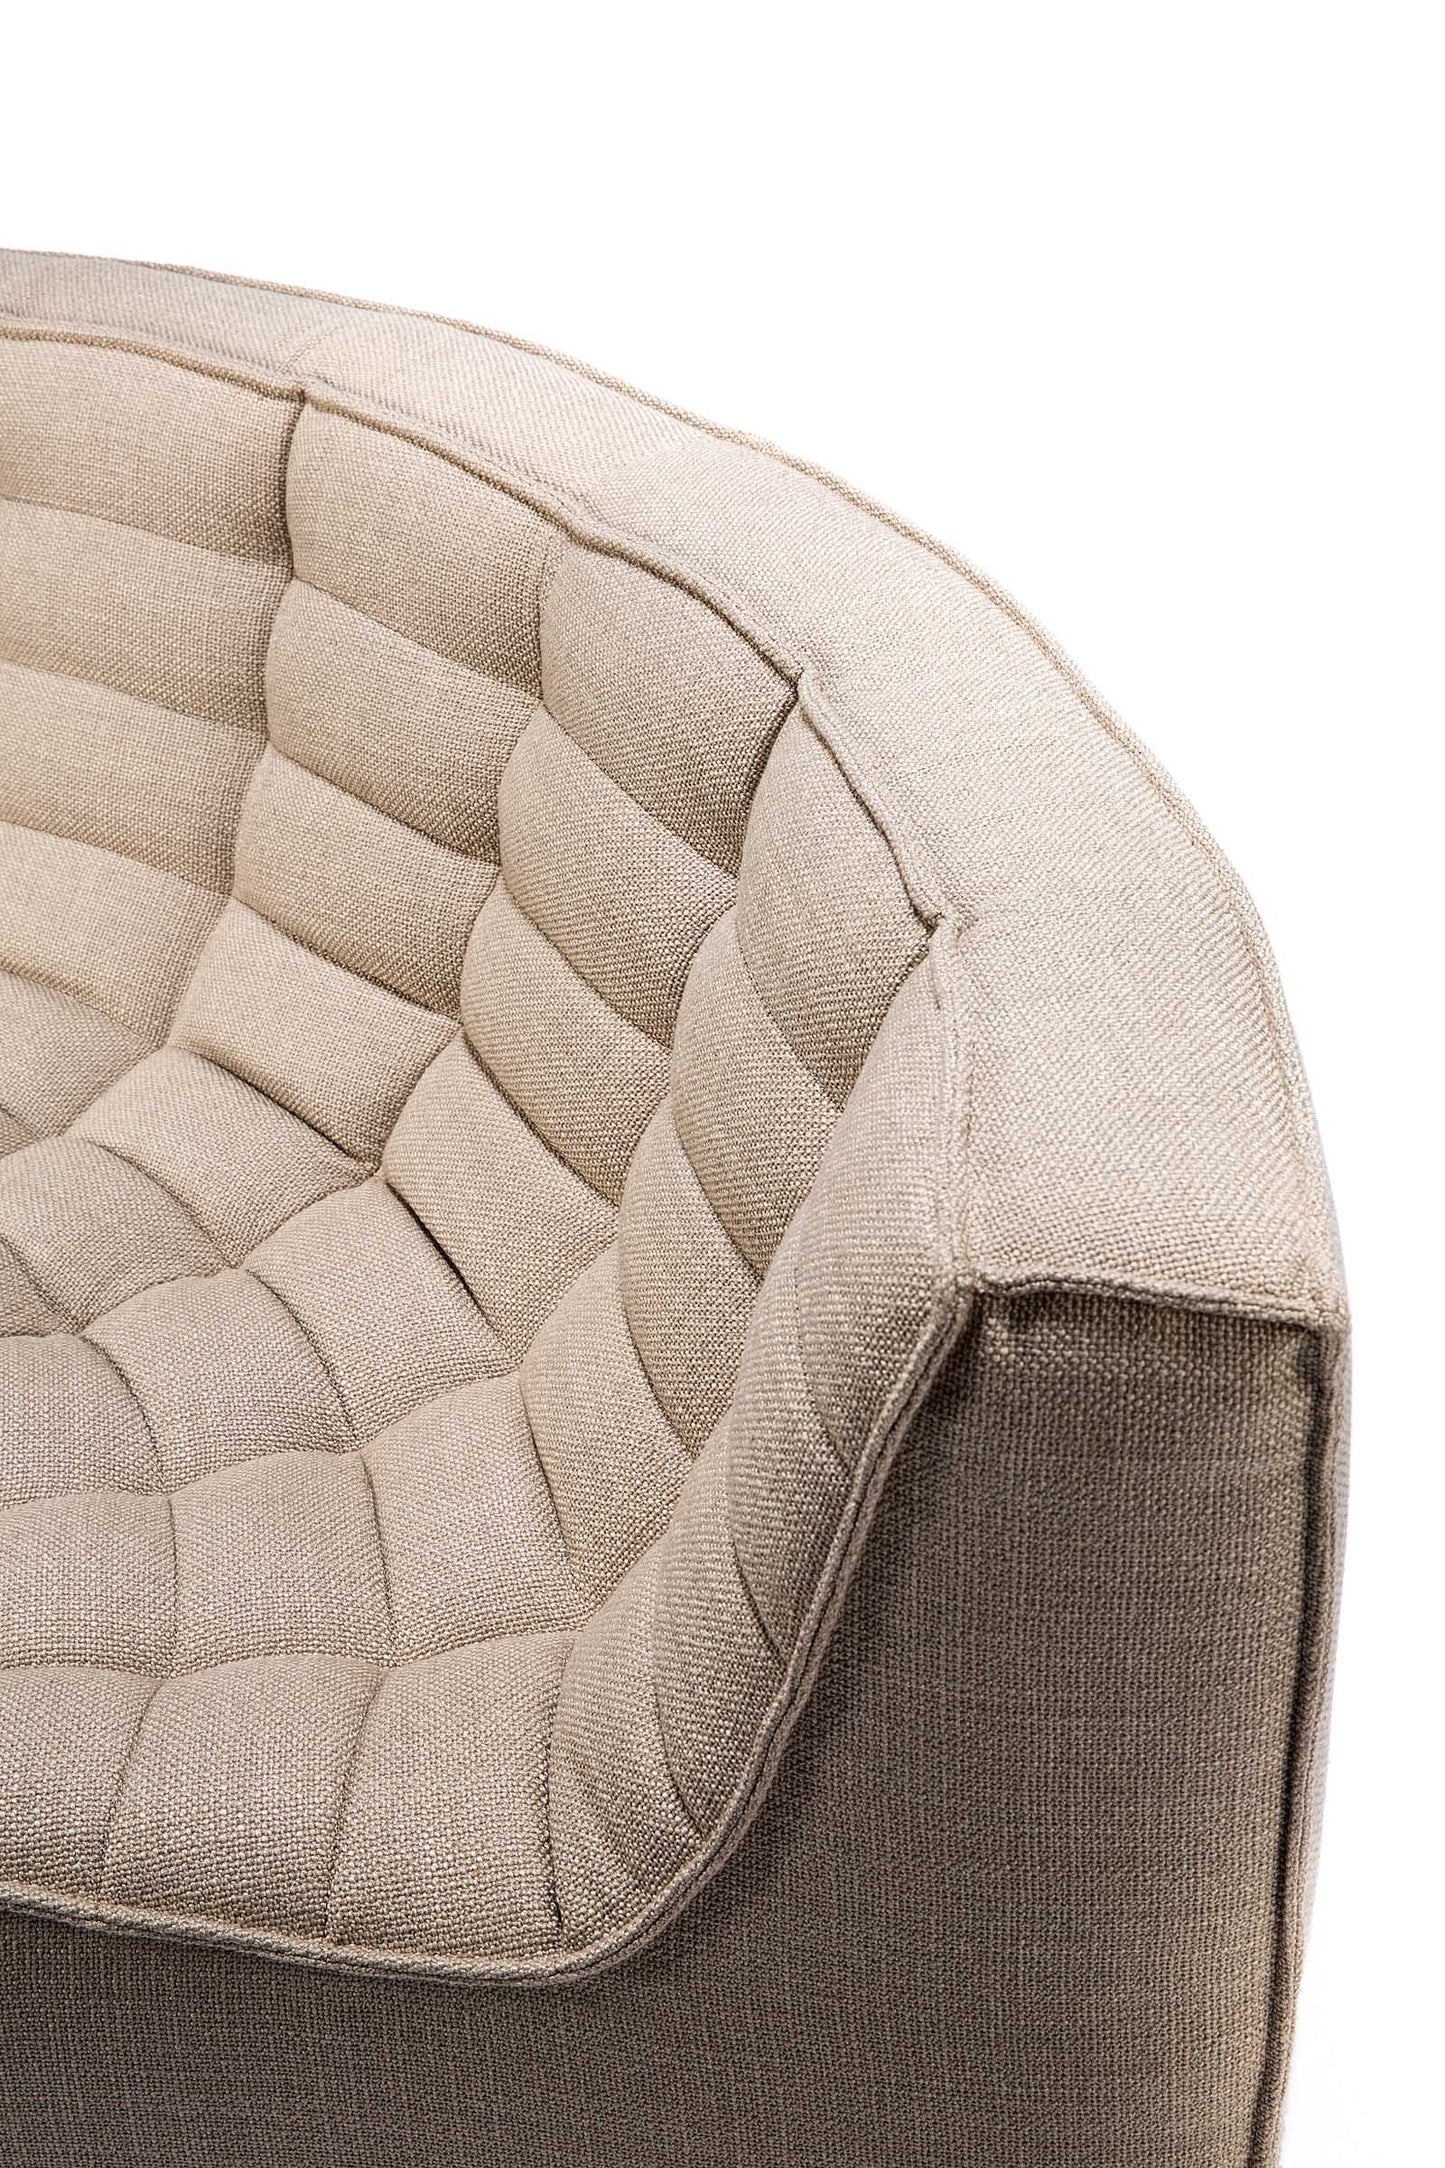 N701 Ethnicraft Slouch Sofa in Dark Beige fabric available from Make Your House A Home, Bendigo, Victoria, Australia